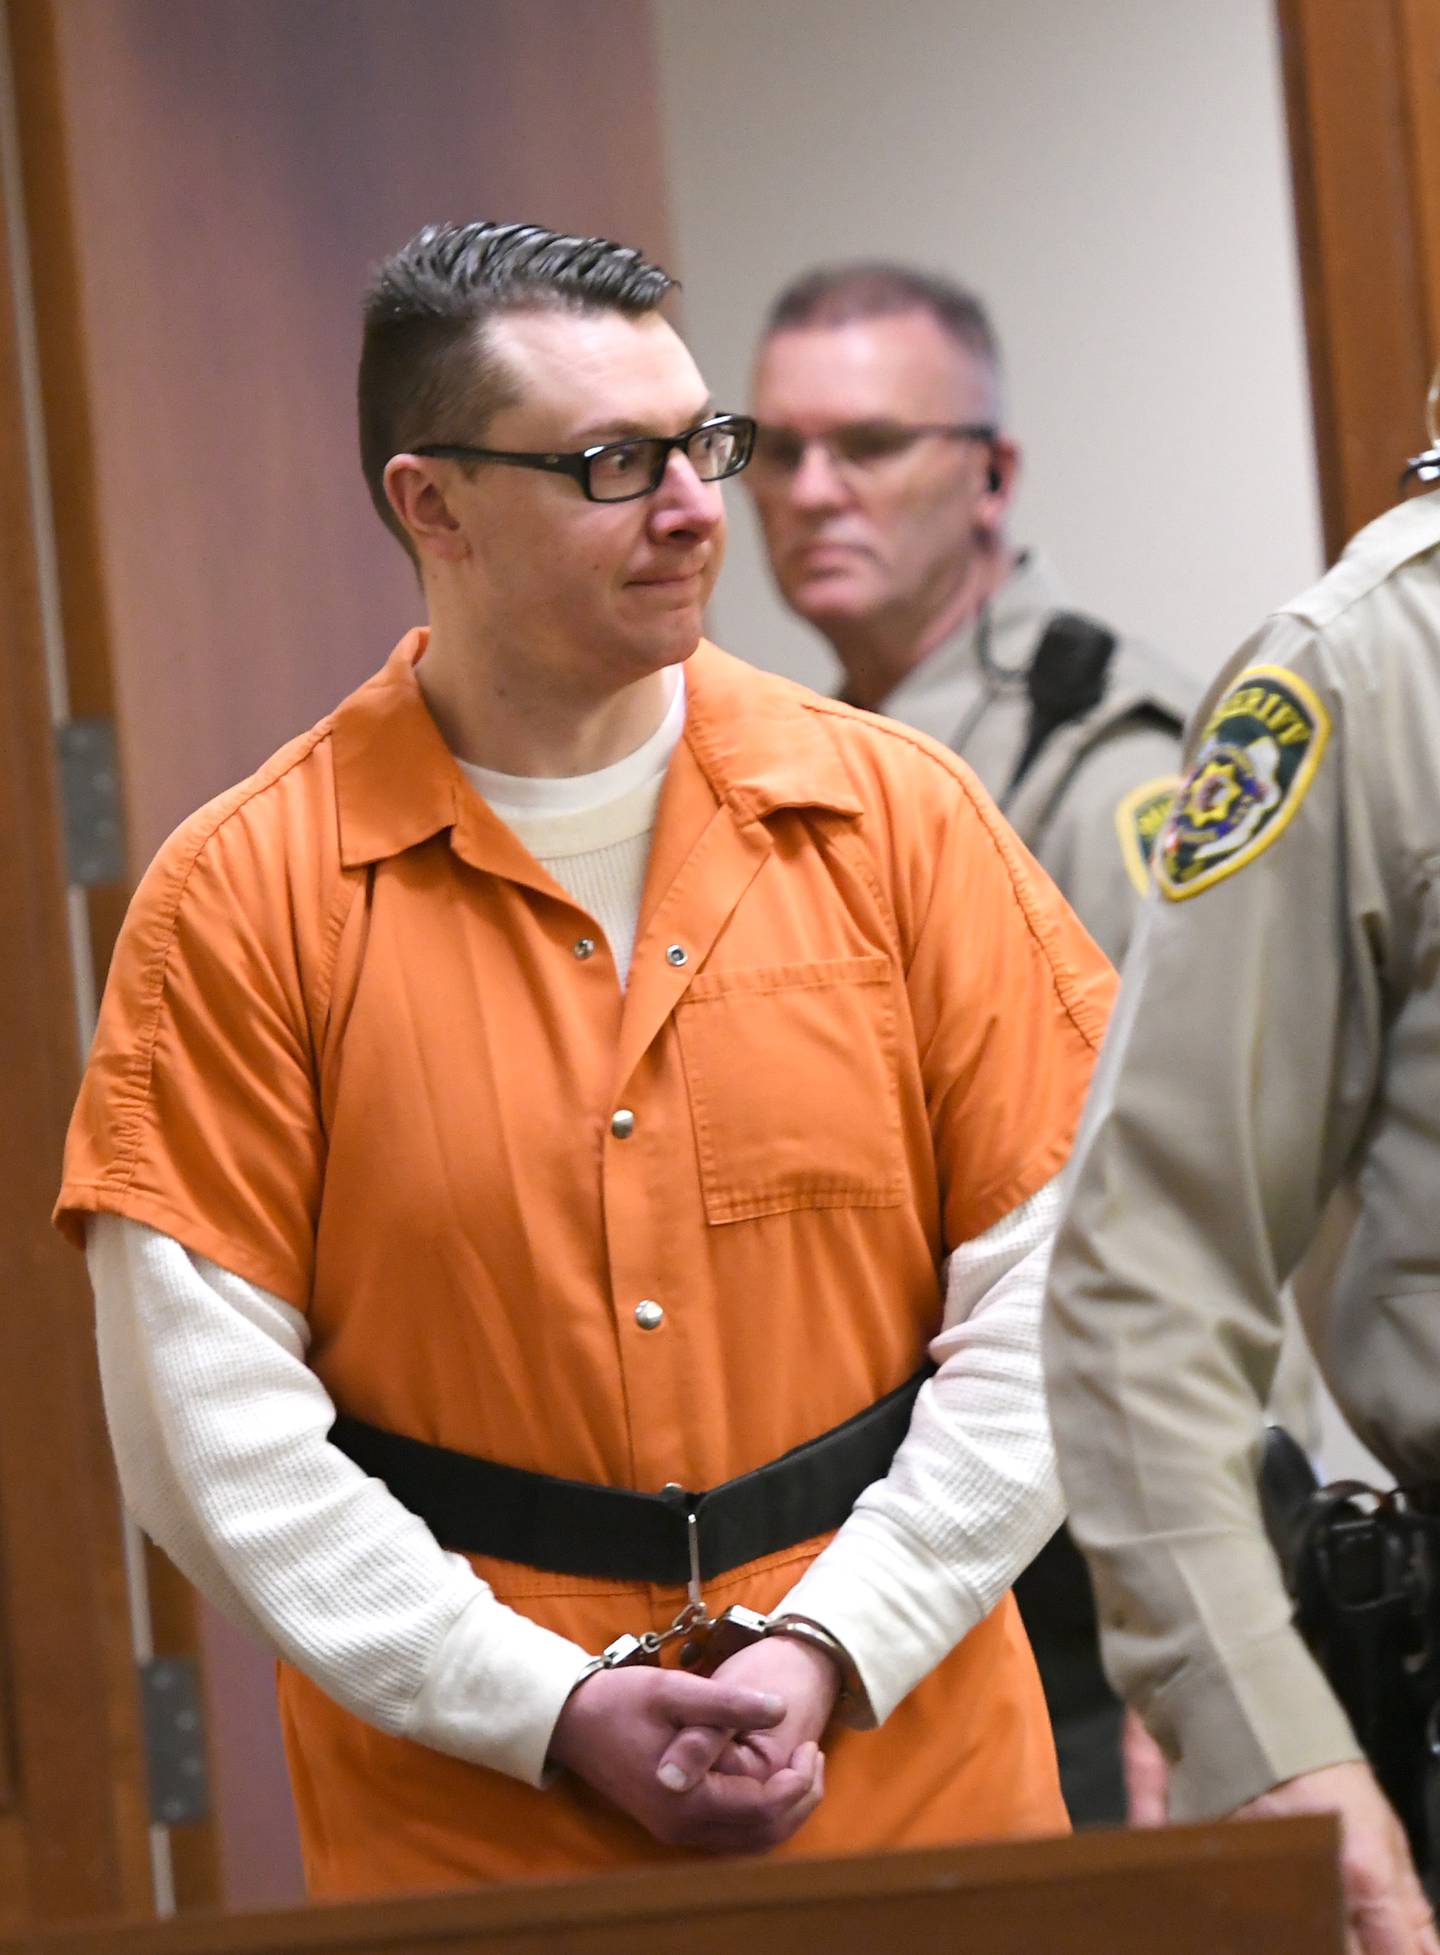 Duane Meyer is escorted into an Ogle County courtroom on Tuesday for a status hearing. He is charged with killing his ex-wife, Maggie Rosko, and their 3-year-old son, Amos.